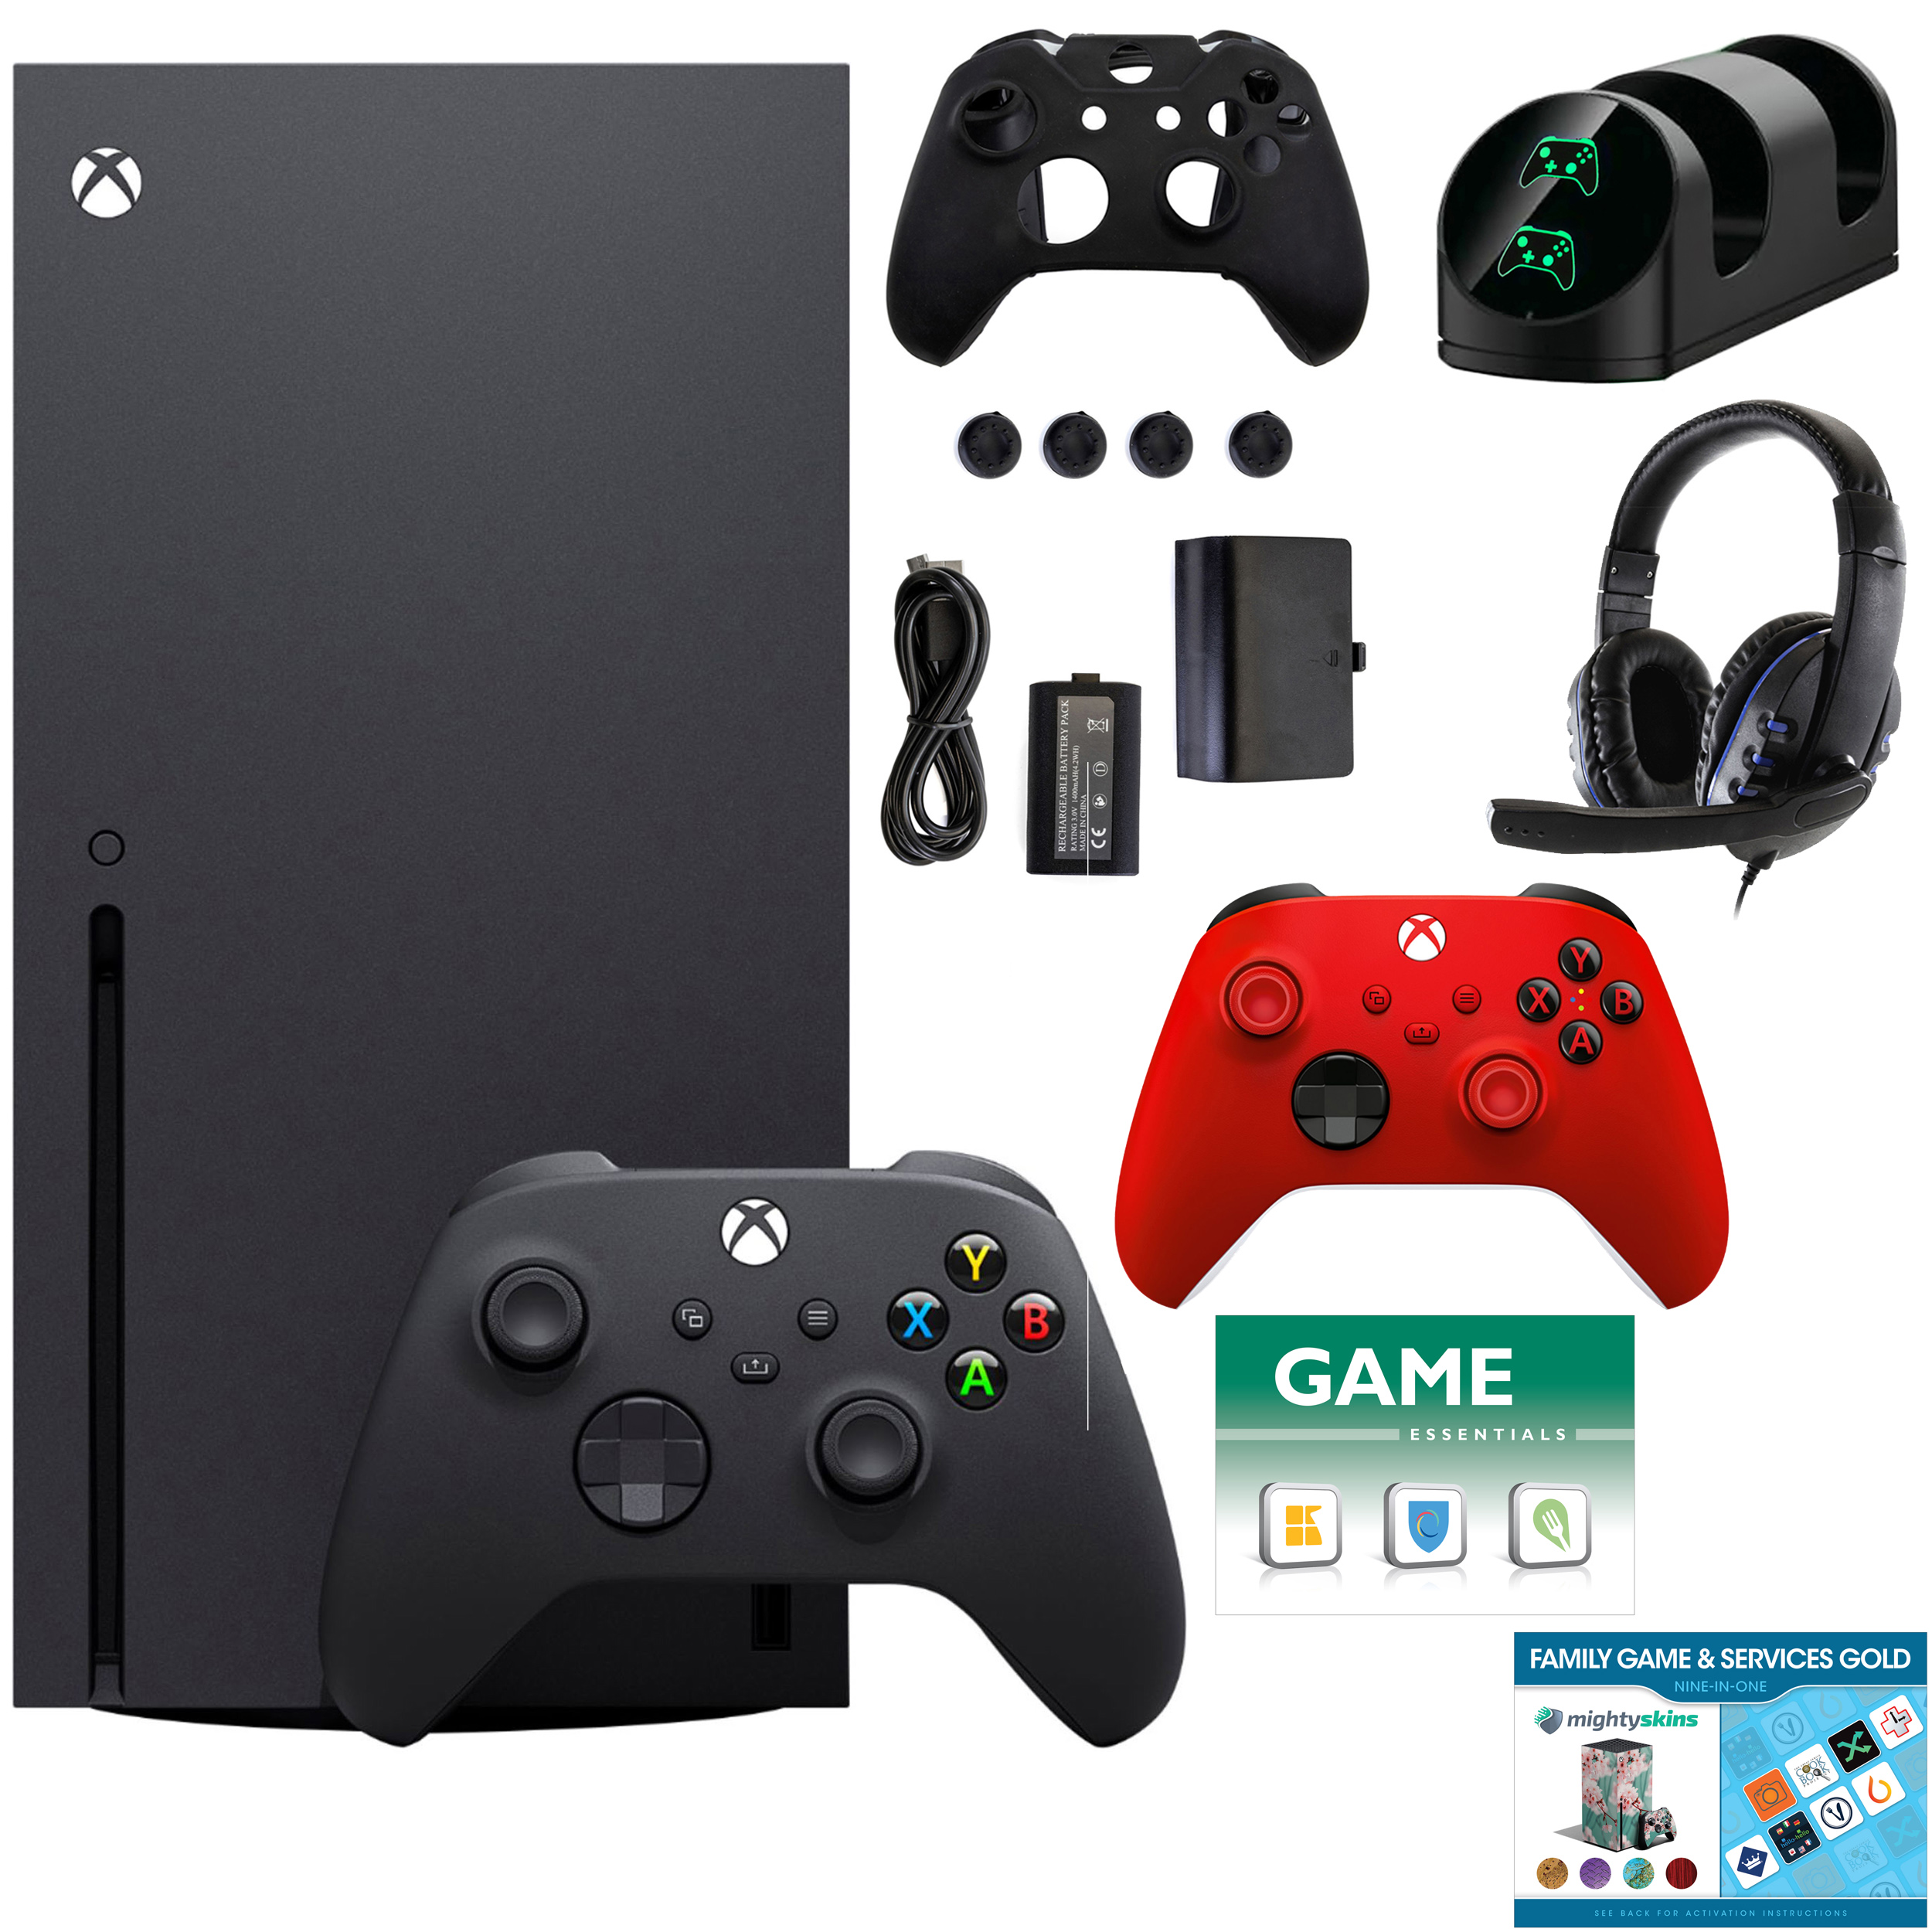 Microsoft Xbox Series X 1TB Console with Extra Red Controller Accessories Kit and 2 Vouchers